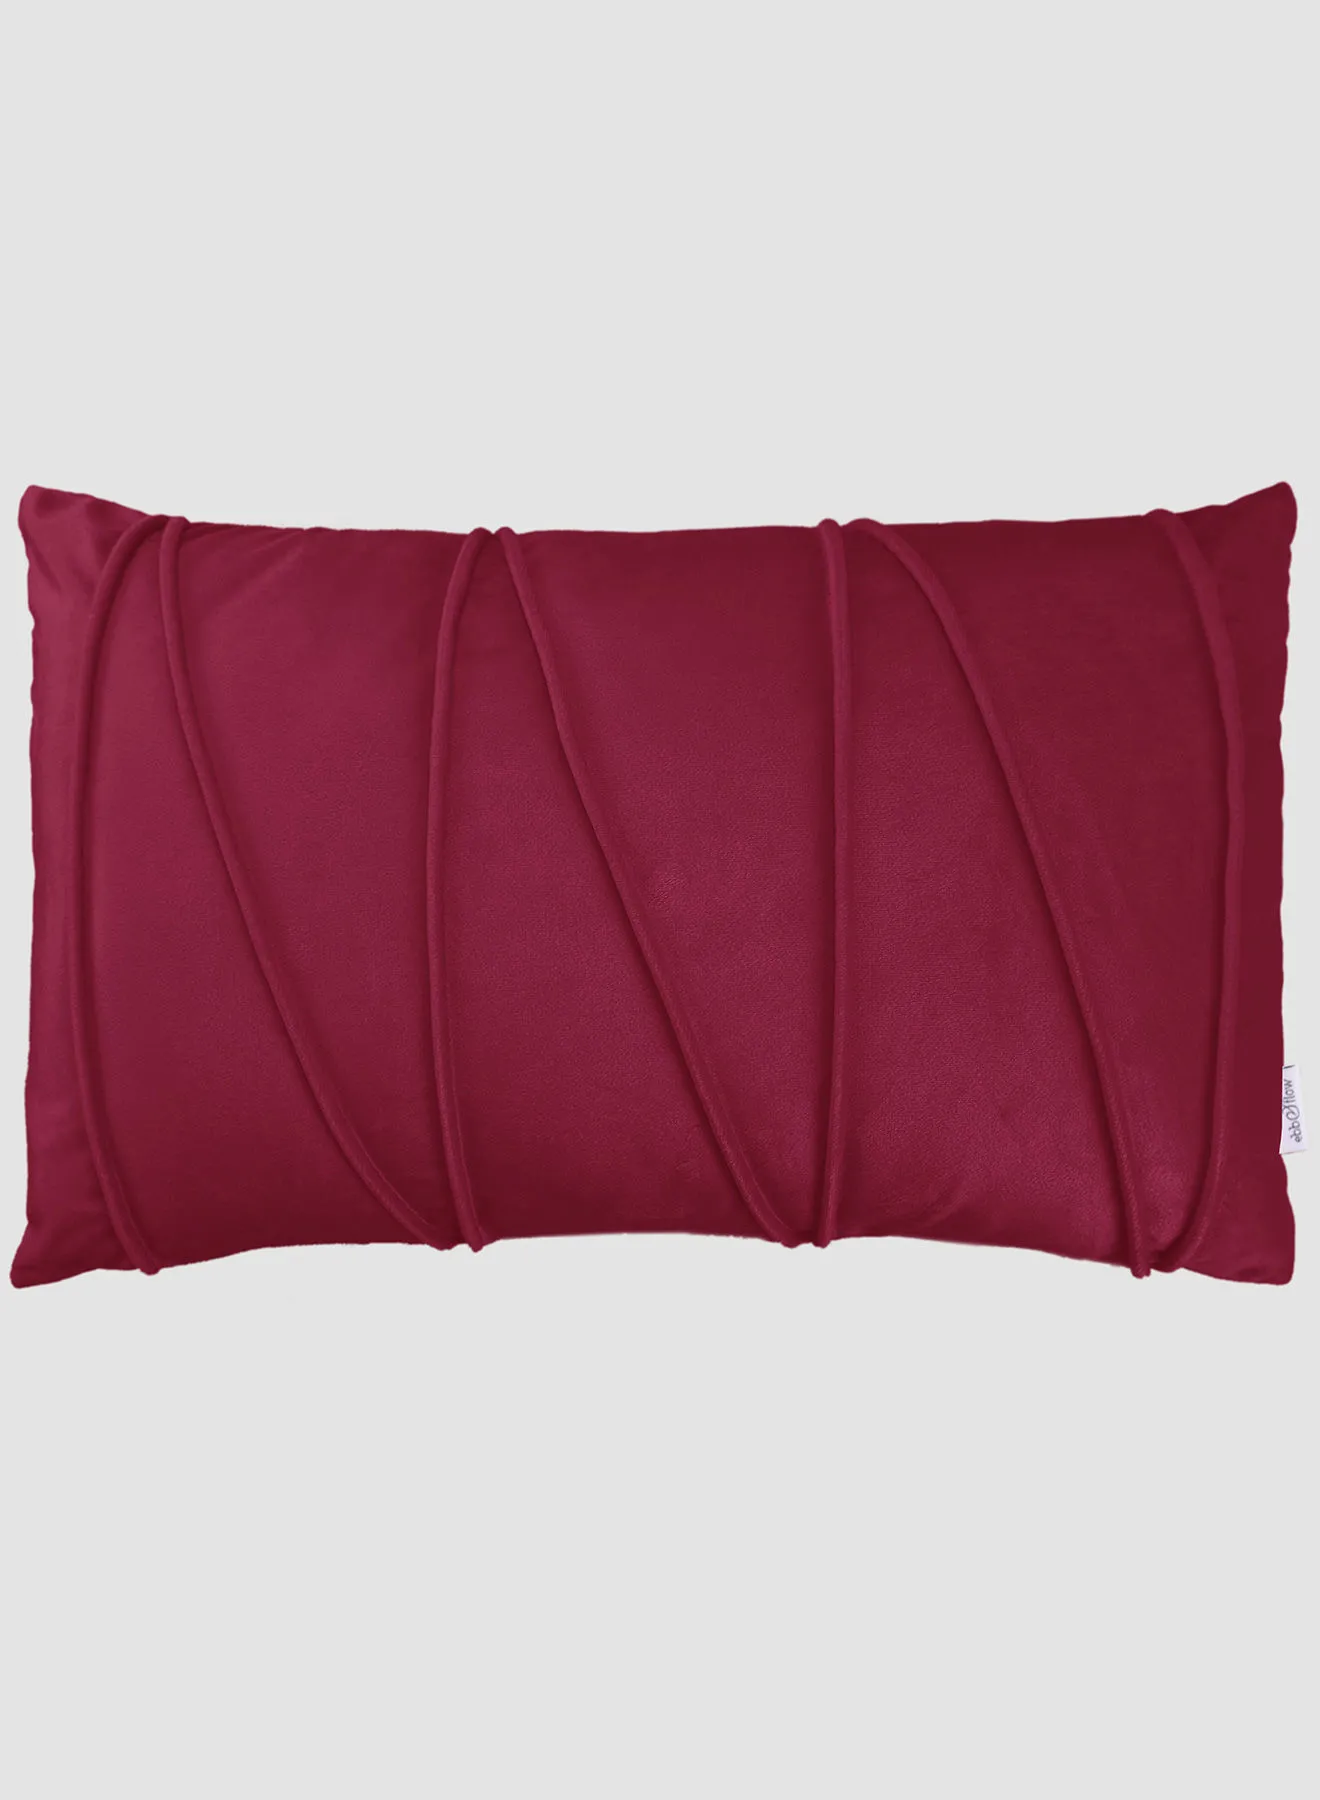 ebb & flow 3D Velvet Cushion  II,Unique Luxury Quality Decor Items for the Perfect Stylish Home Red 30 x 50cm